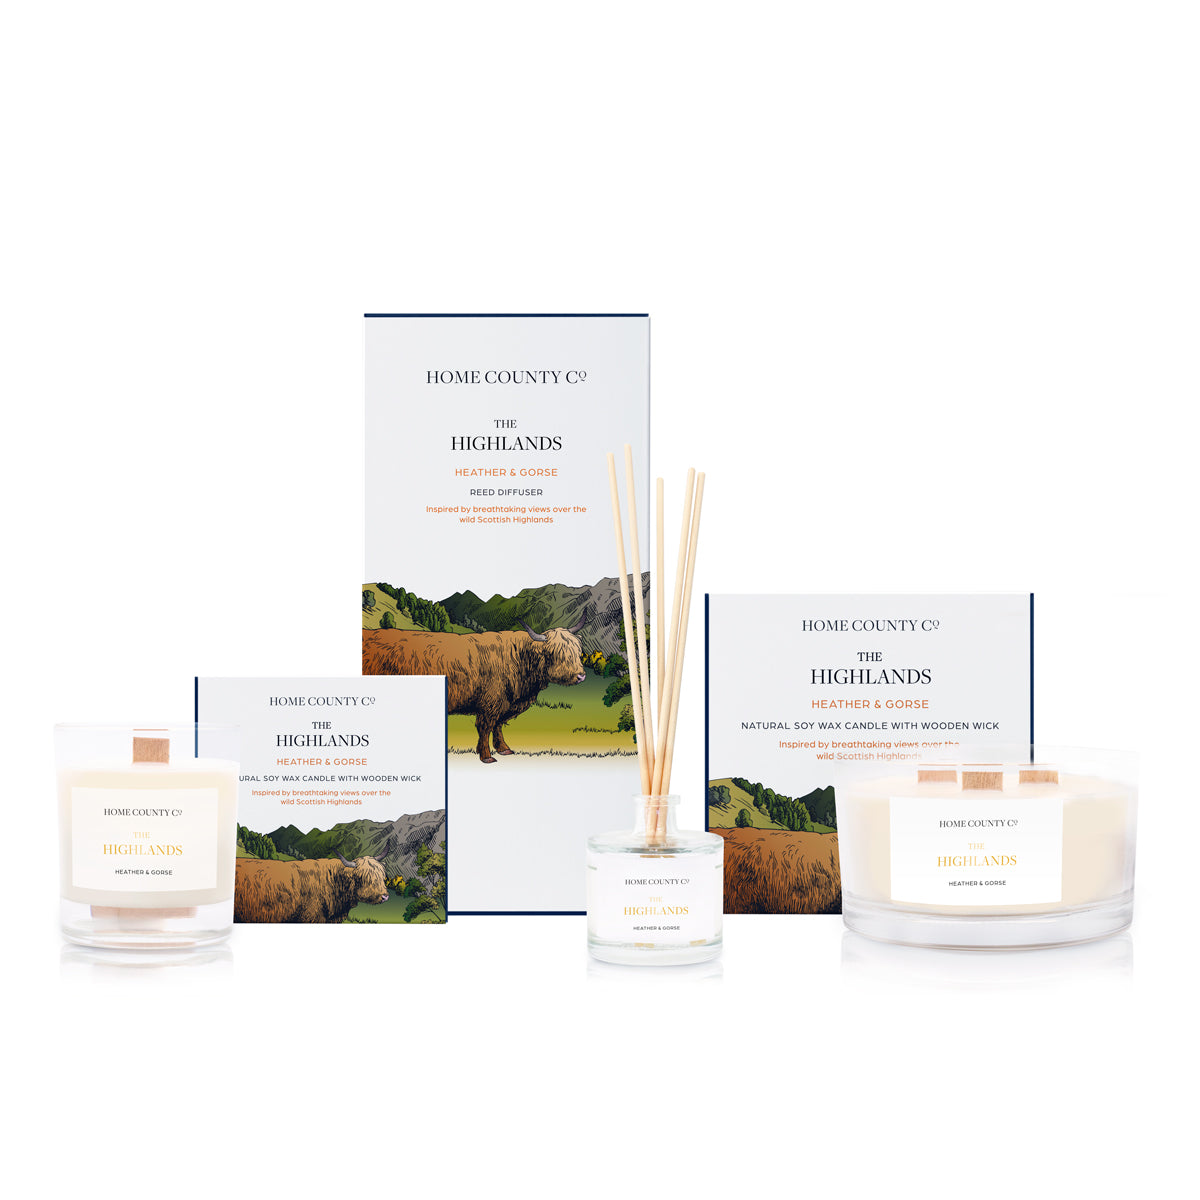 The Highlands Heather and Gorse scented collection from the Home County Co.